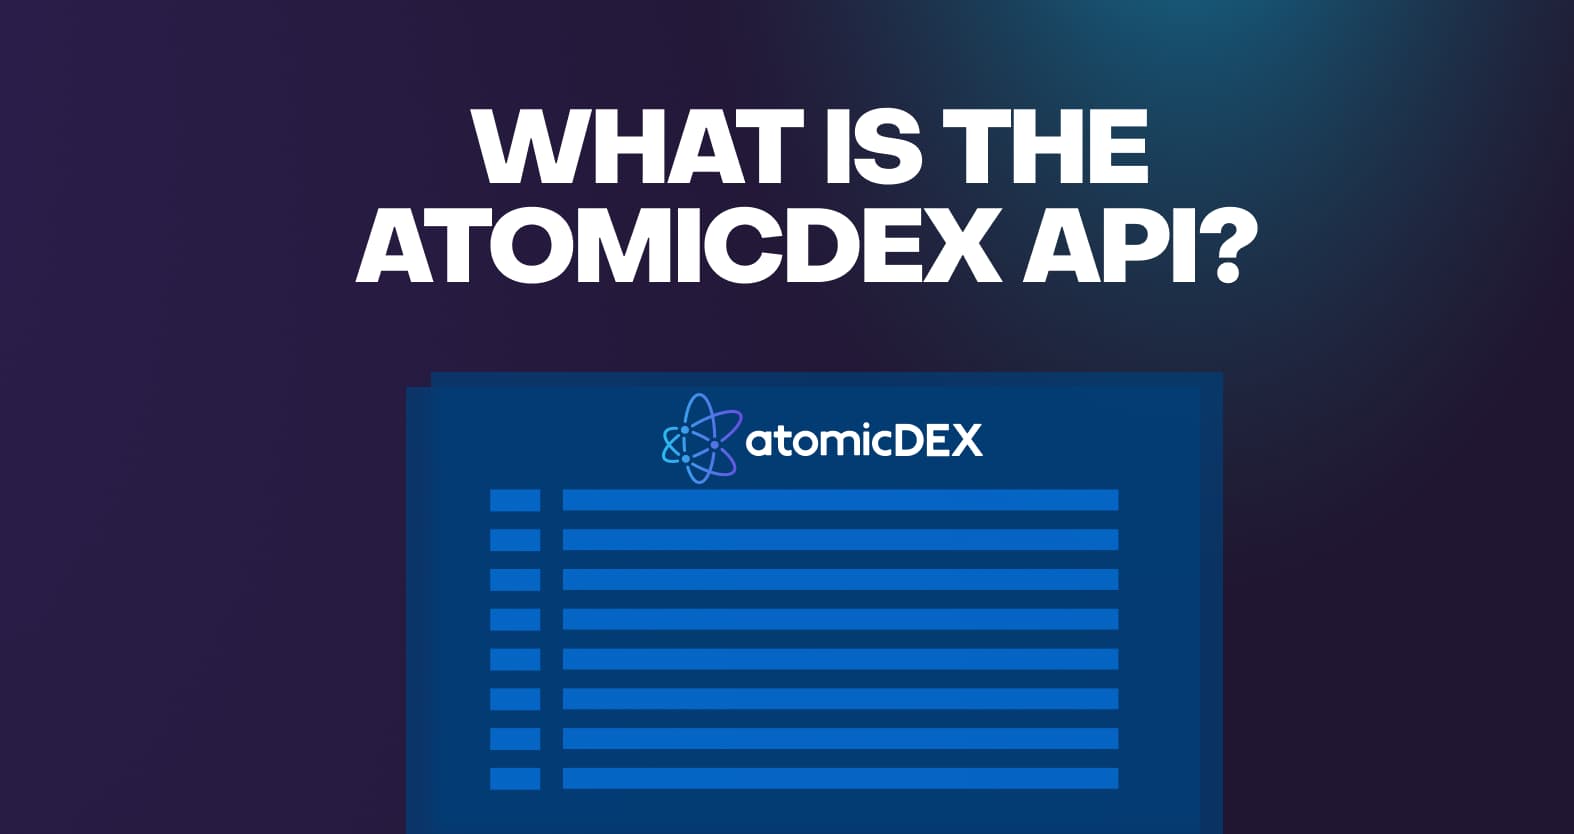 What Is the AtomicDEX API?